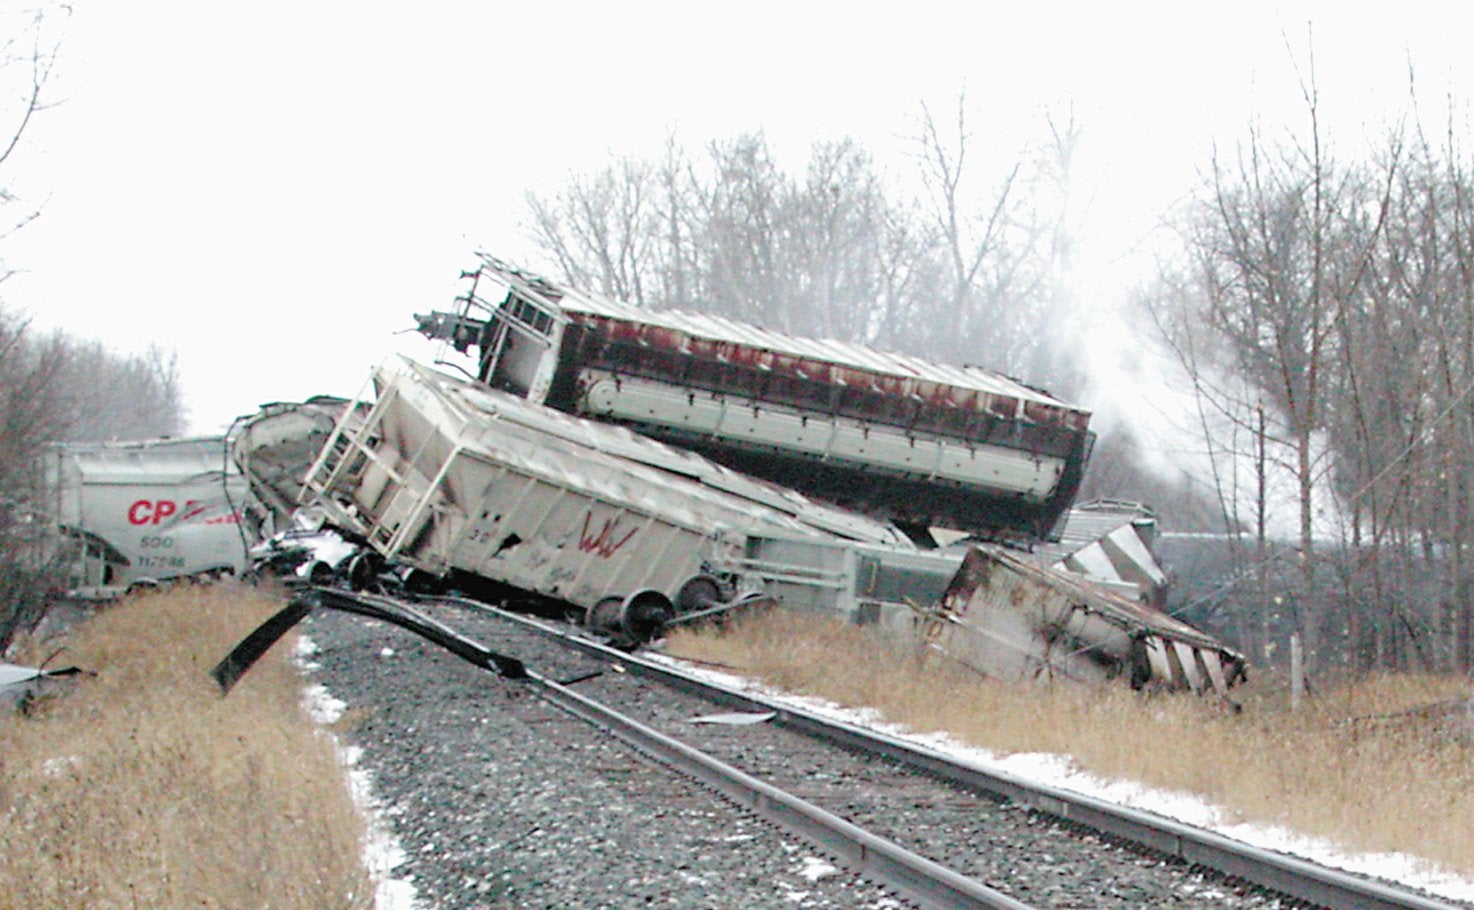 The wreckage in January 2002. (Photo: Minot Daily News, Heidi Weiss, AP)